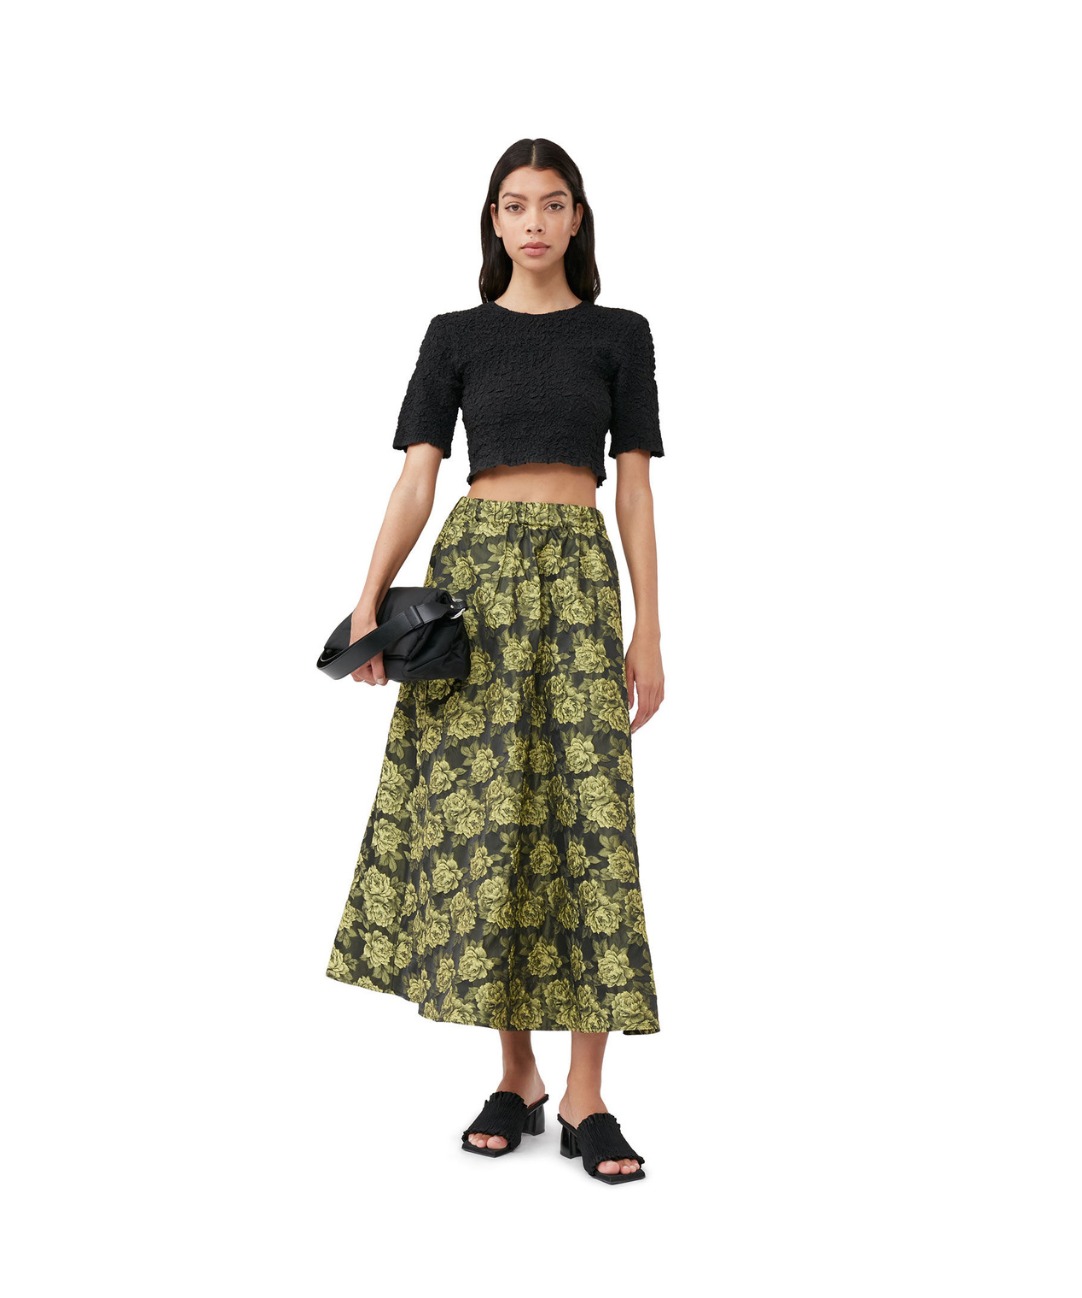 An image of a model on a white backdrop wearing the following GANNI items: a black textured cropped t-shirt, a high-waisted A-line skirt black and yellow skirt with a floral print, a black handbag and black heeled mule sandals.